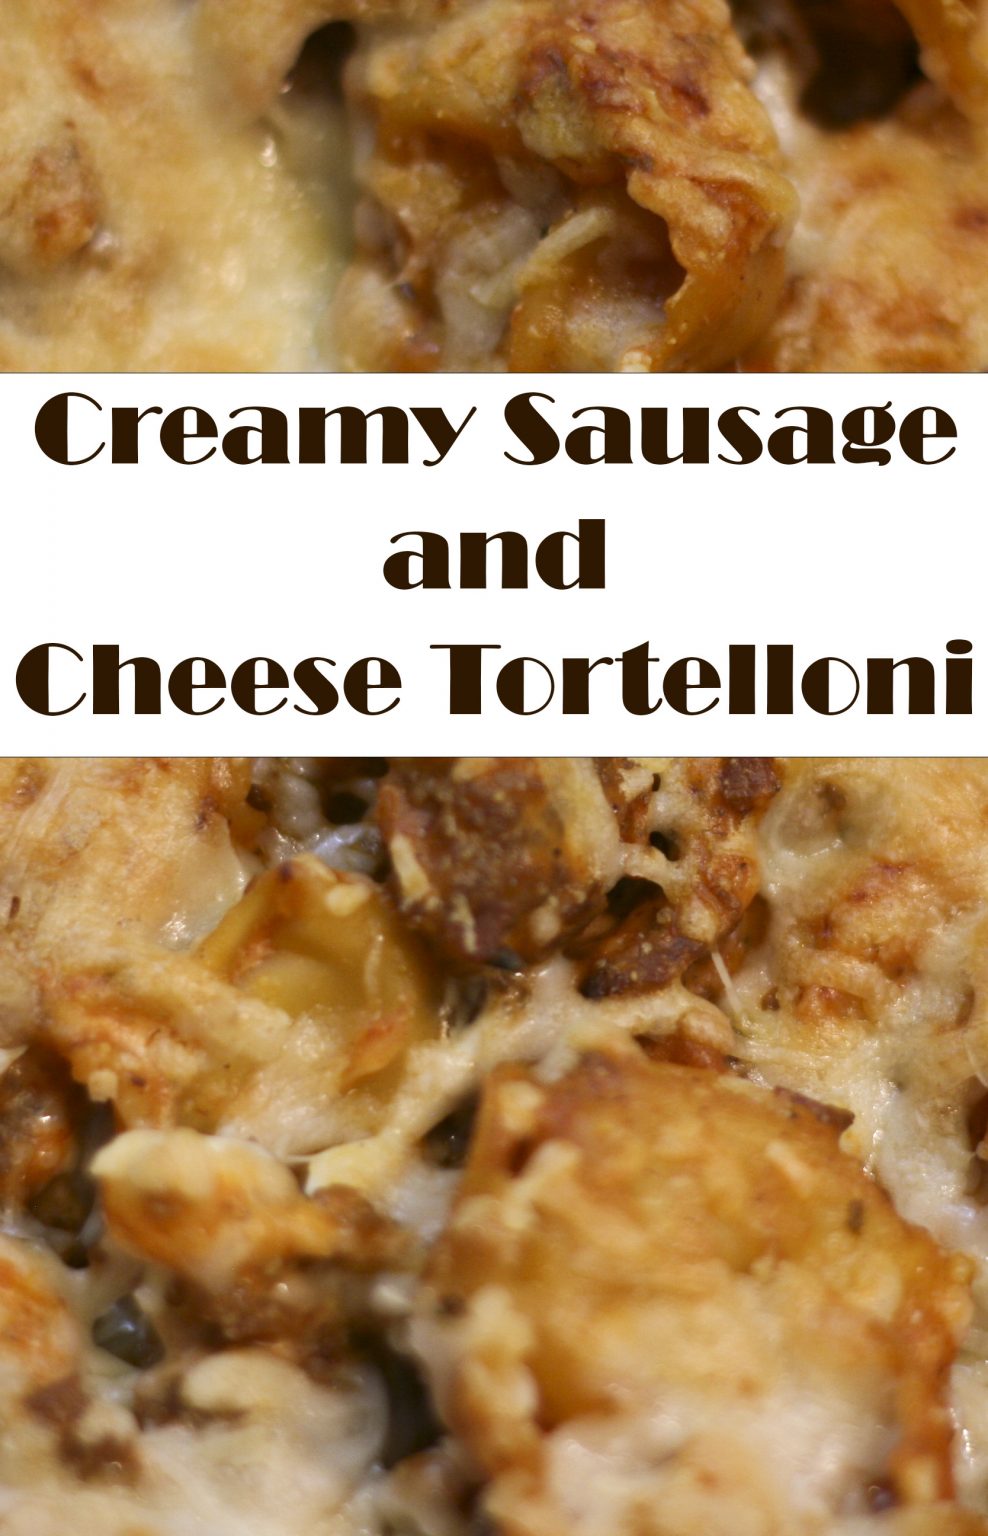 Creamy Sausage and Cheese Tortelloni – Chloe's Tray